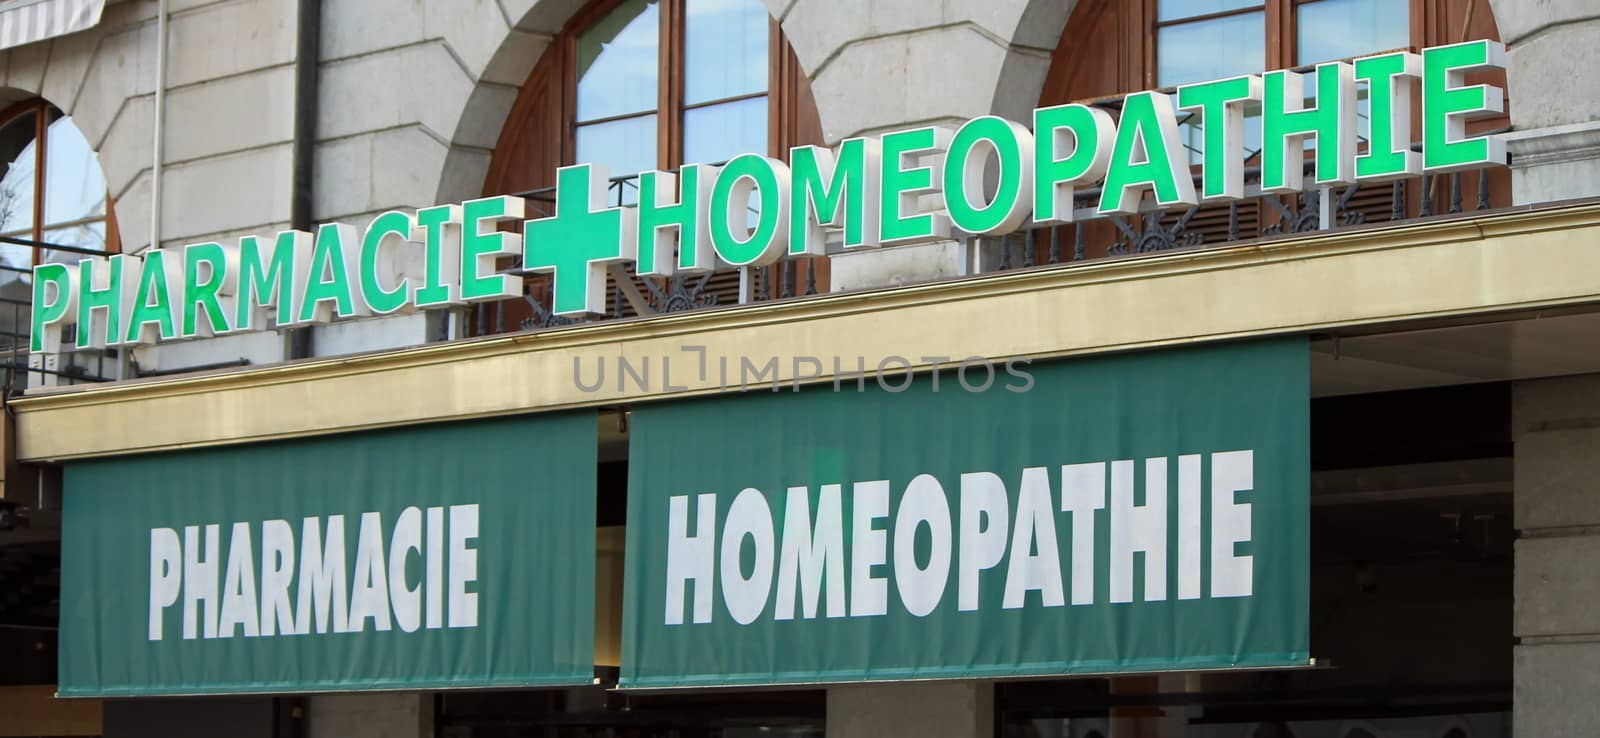 Homeopathic drugstore (french) by Elenaphotos21